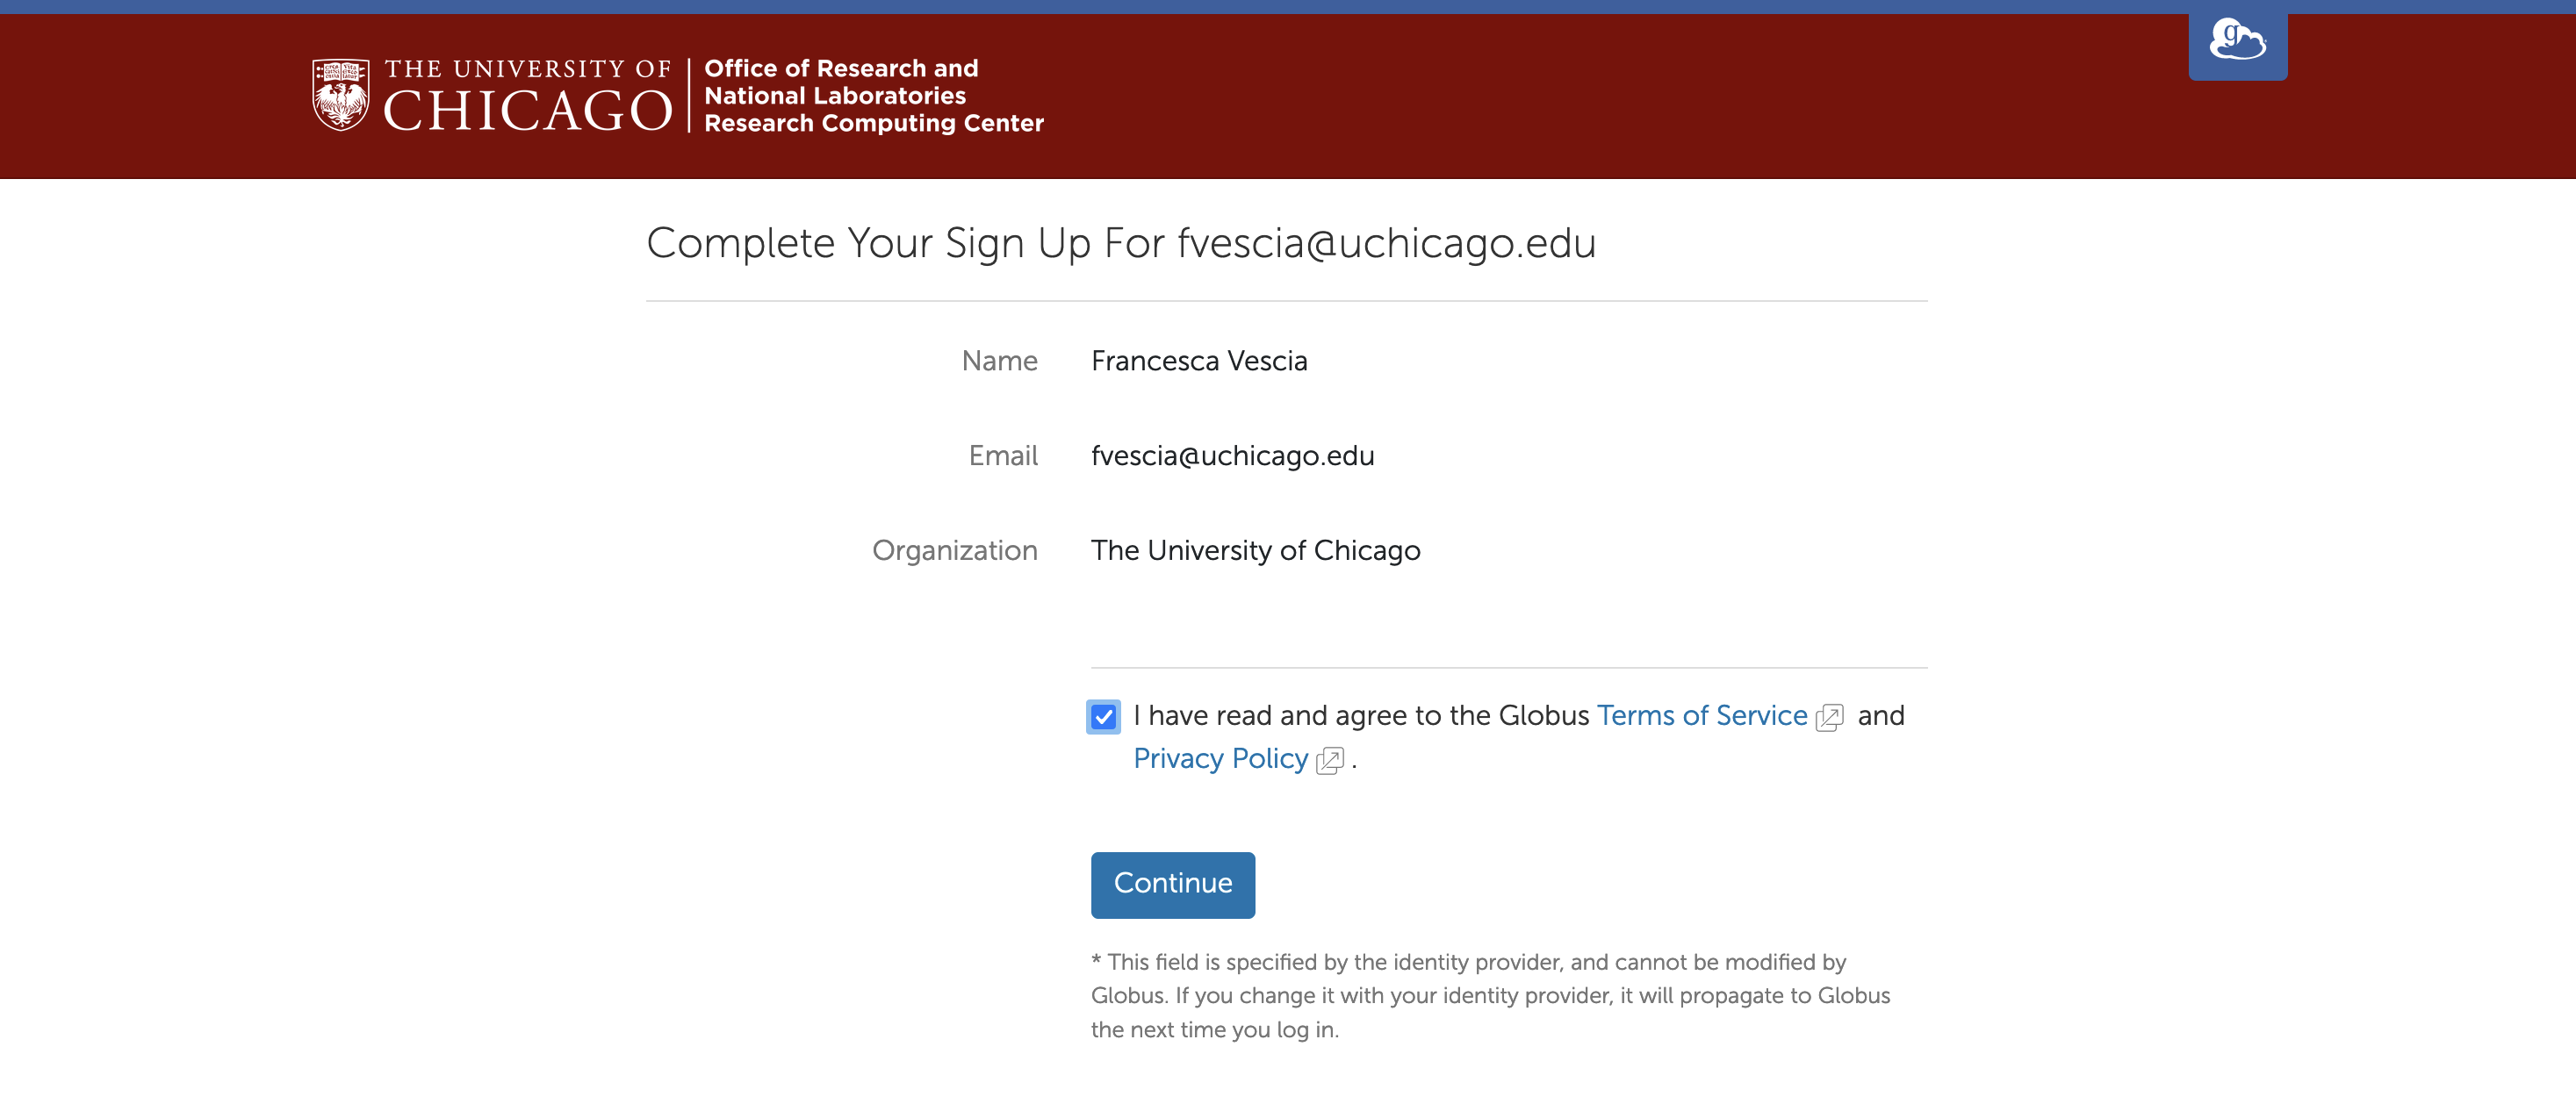 A webpage that says "Complete Your Sign Up". The box indicating the user has agreed to the Terms of Service and Privacy Policy is checked.